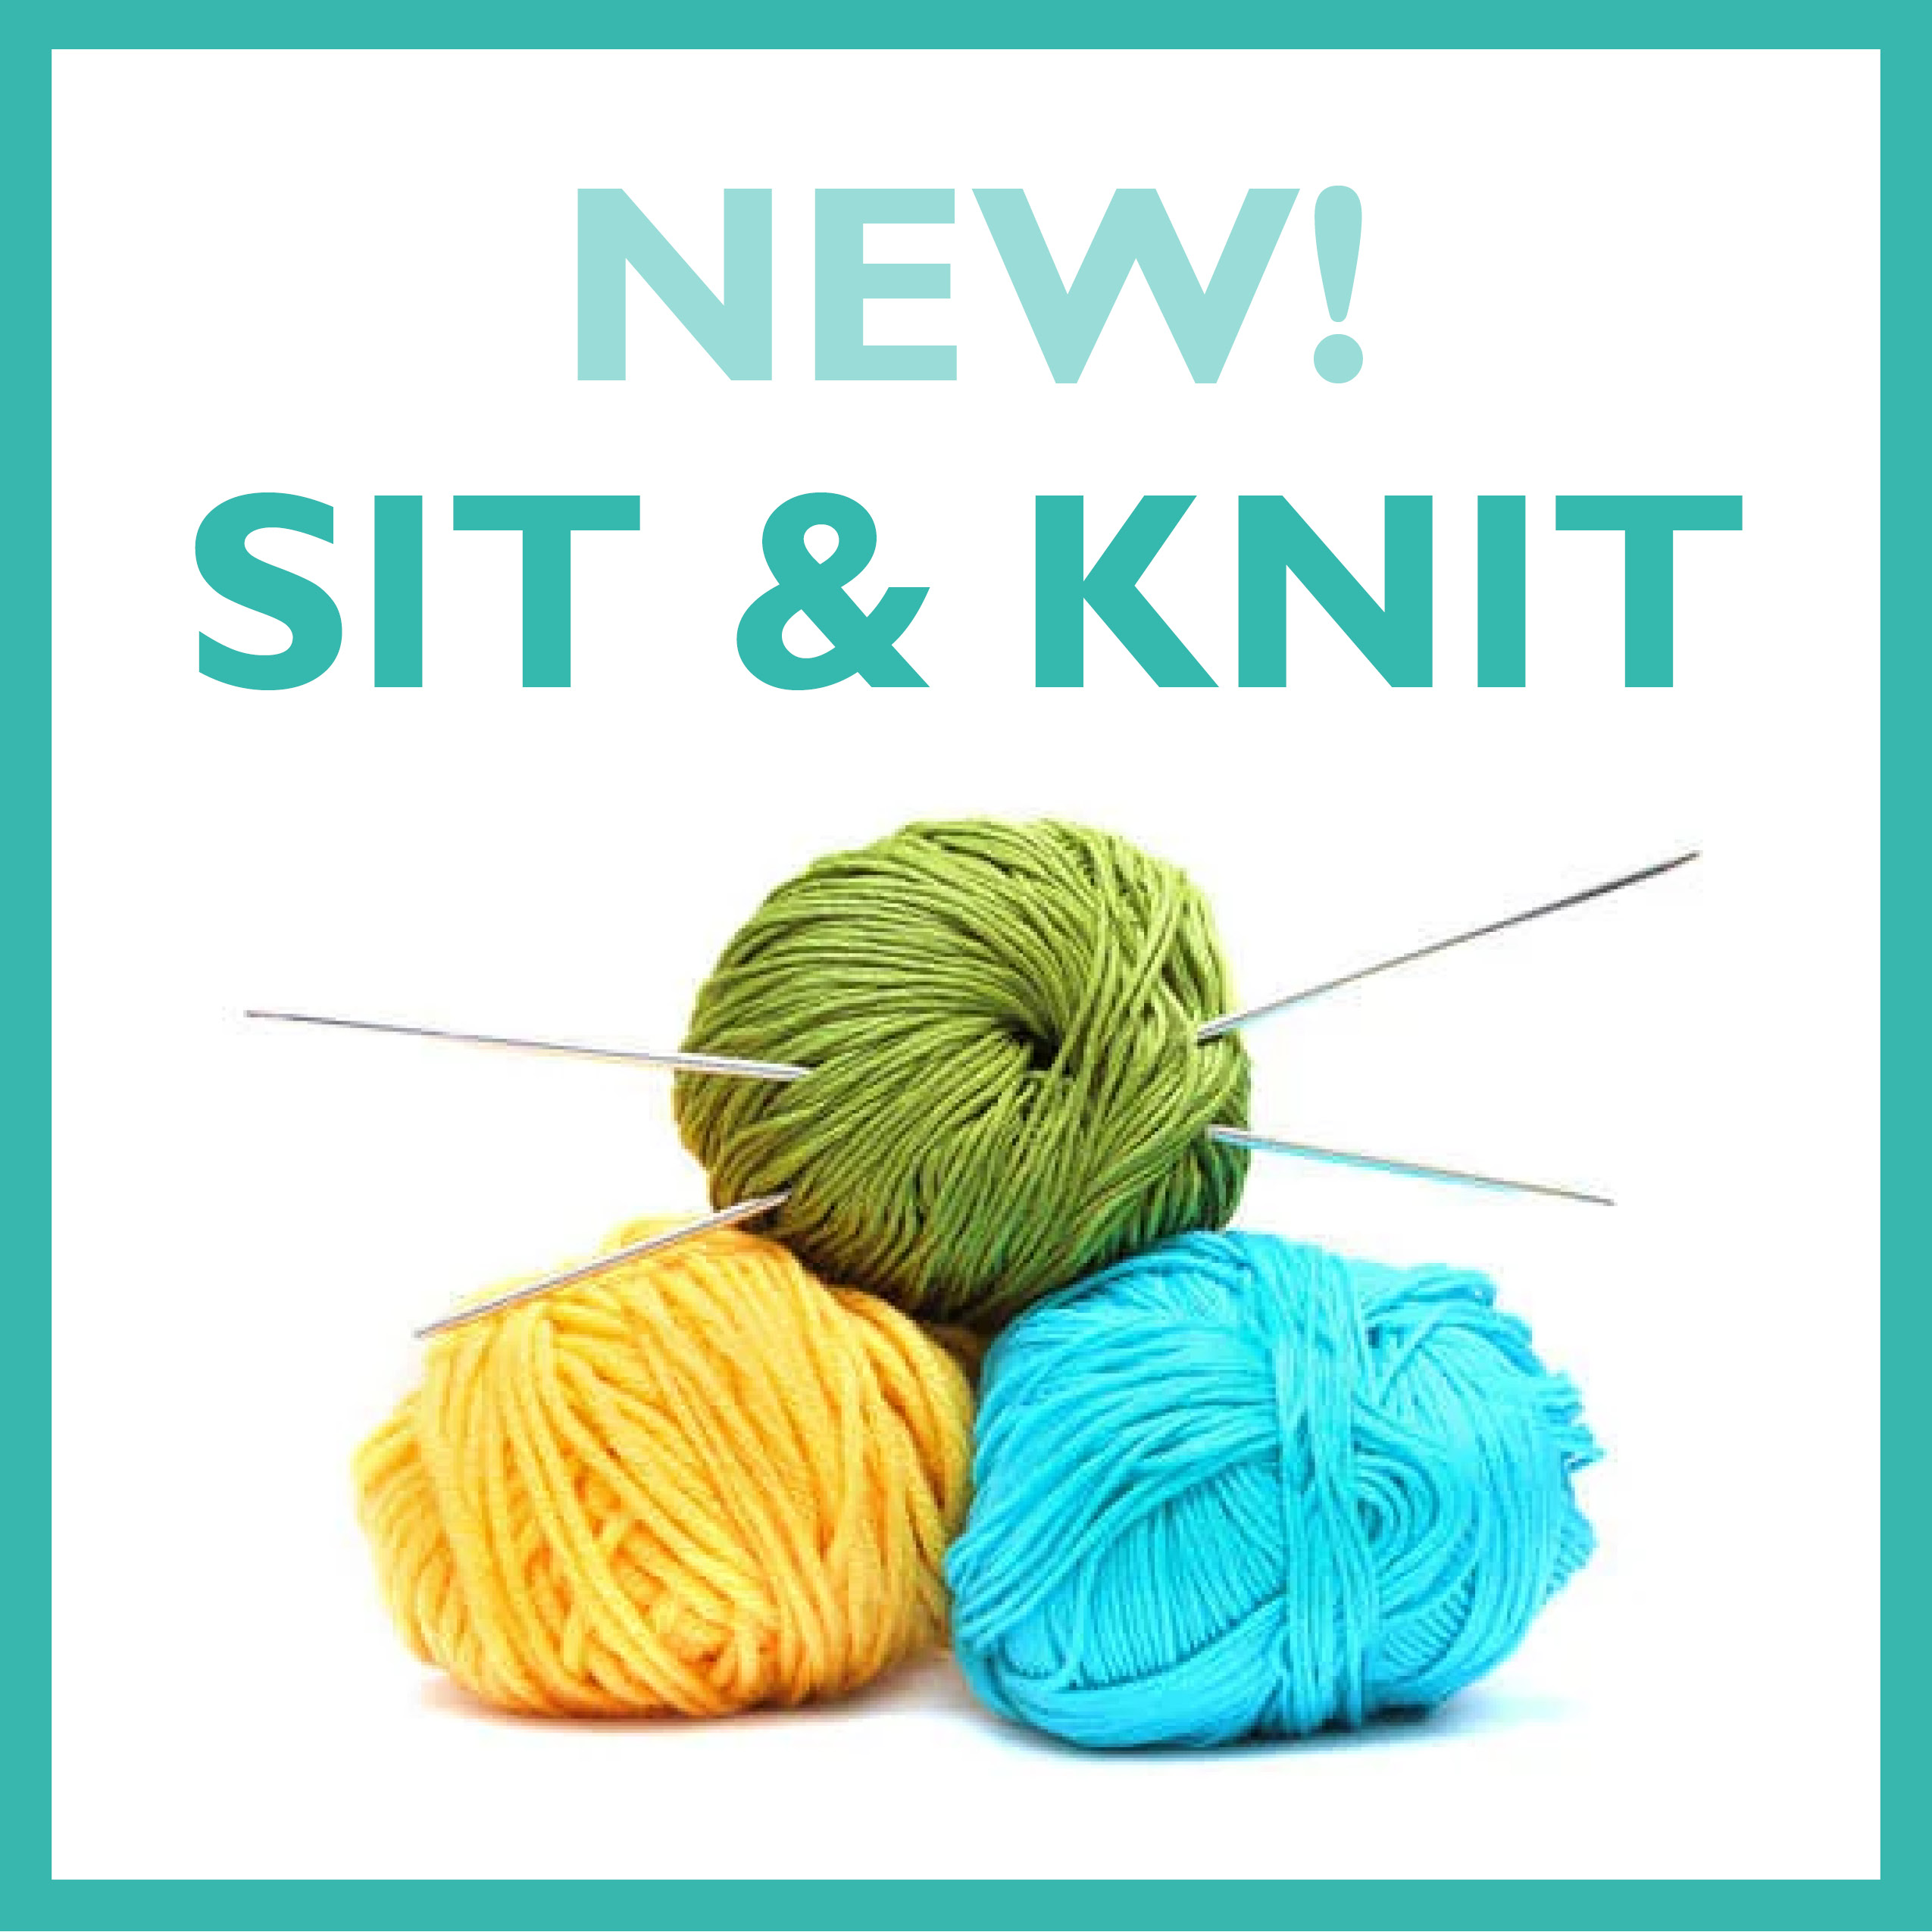 sit and knit.jpg